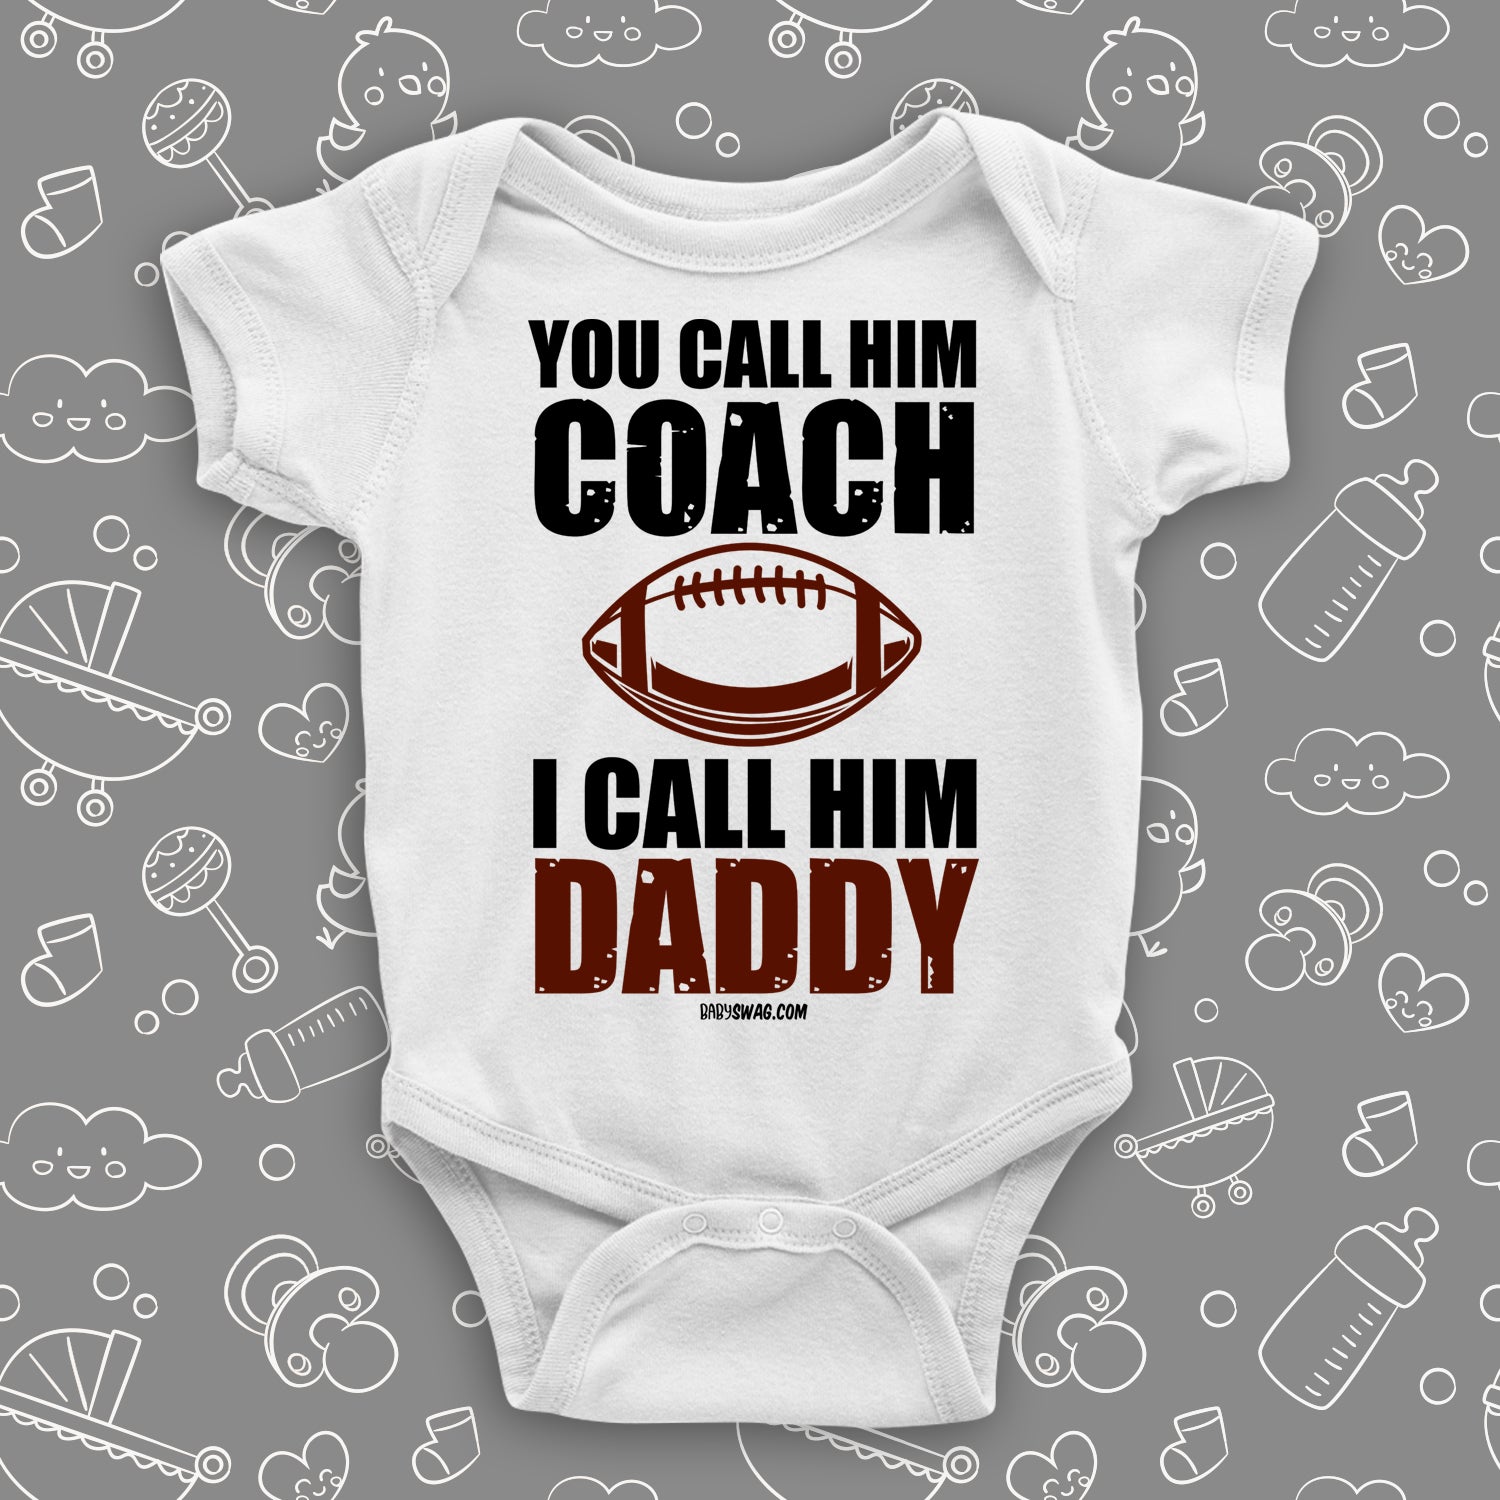 Cute baby onesie with saying "You Call Him Coach, I Call Him Daddy" in white. 